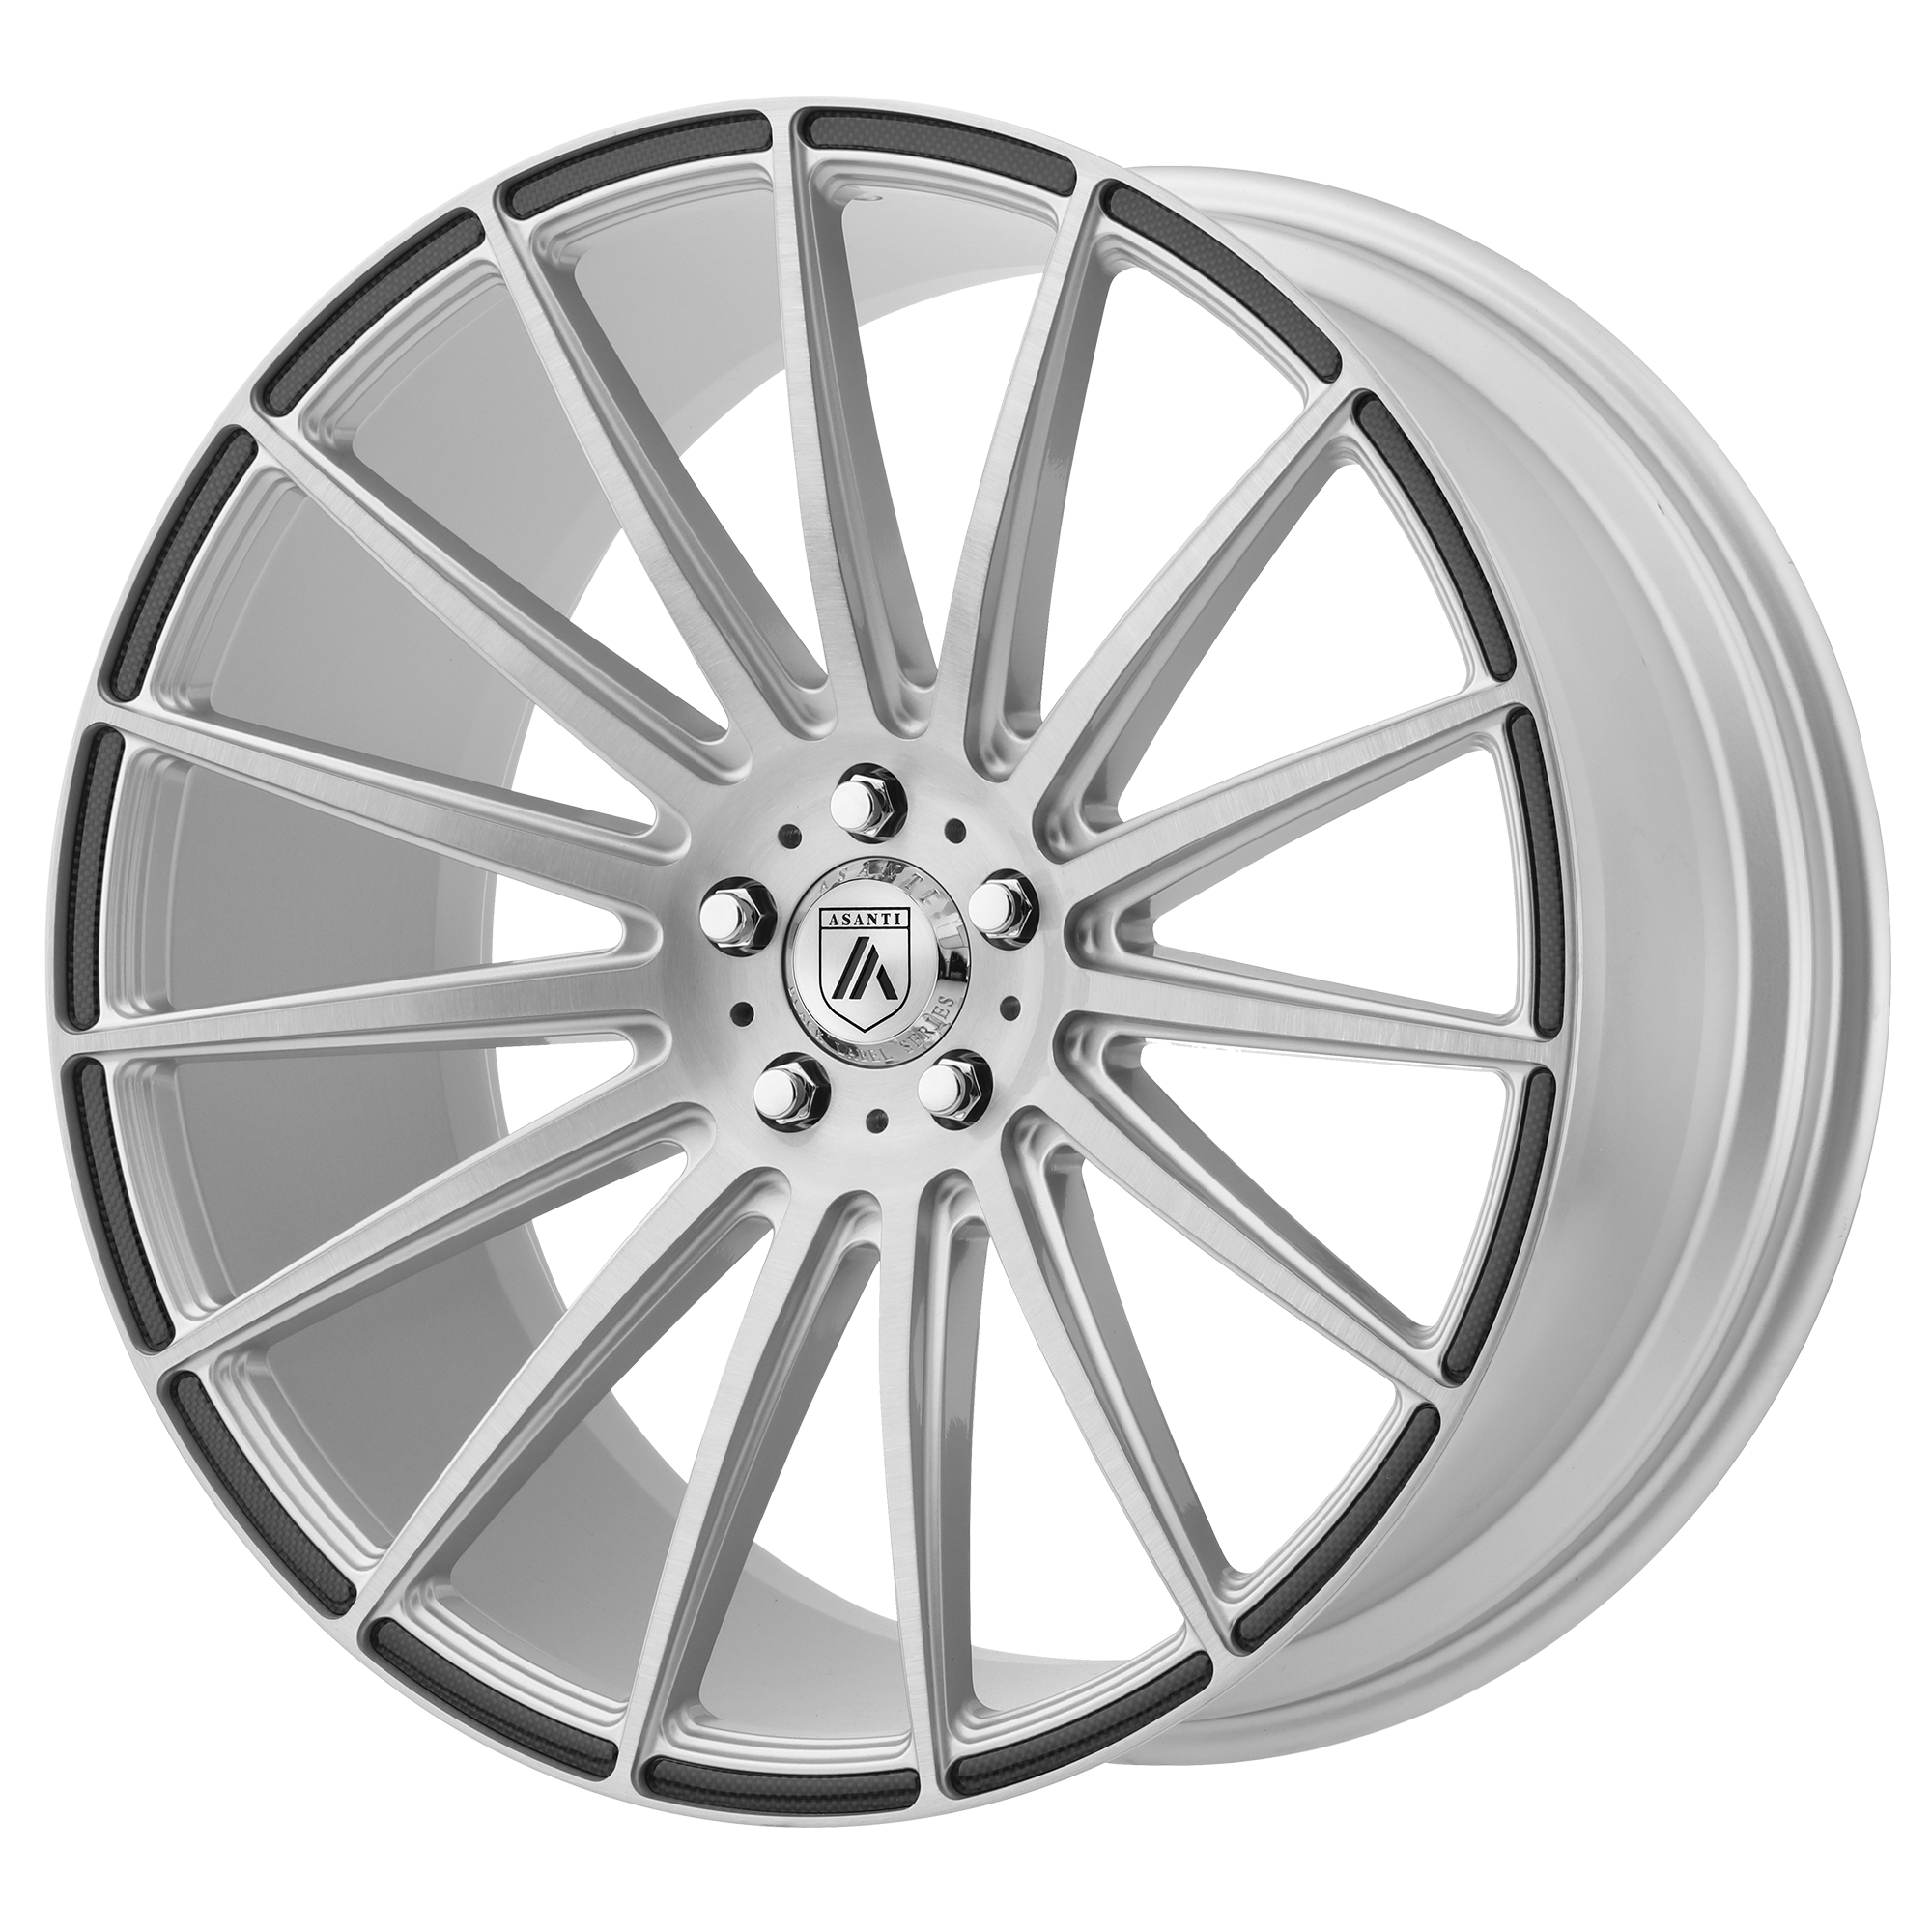 POLARIS 20x9 5x112.00 BRUSHED SILVER W/ CARBON FIBER INSERTS (35 mm) - Tires and Engine Performance